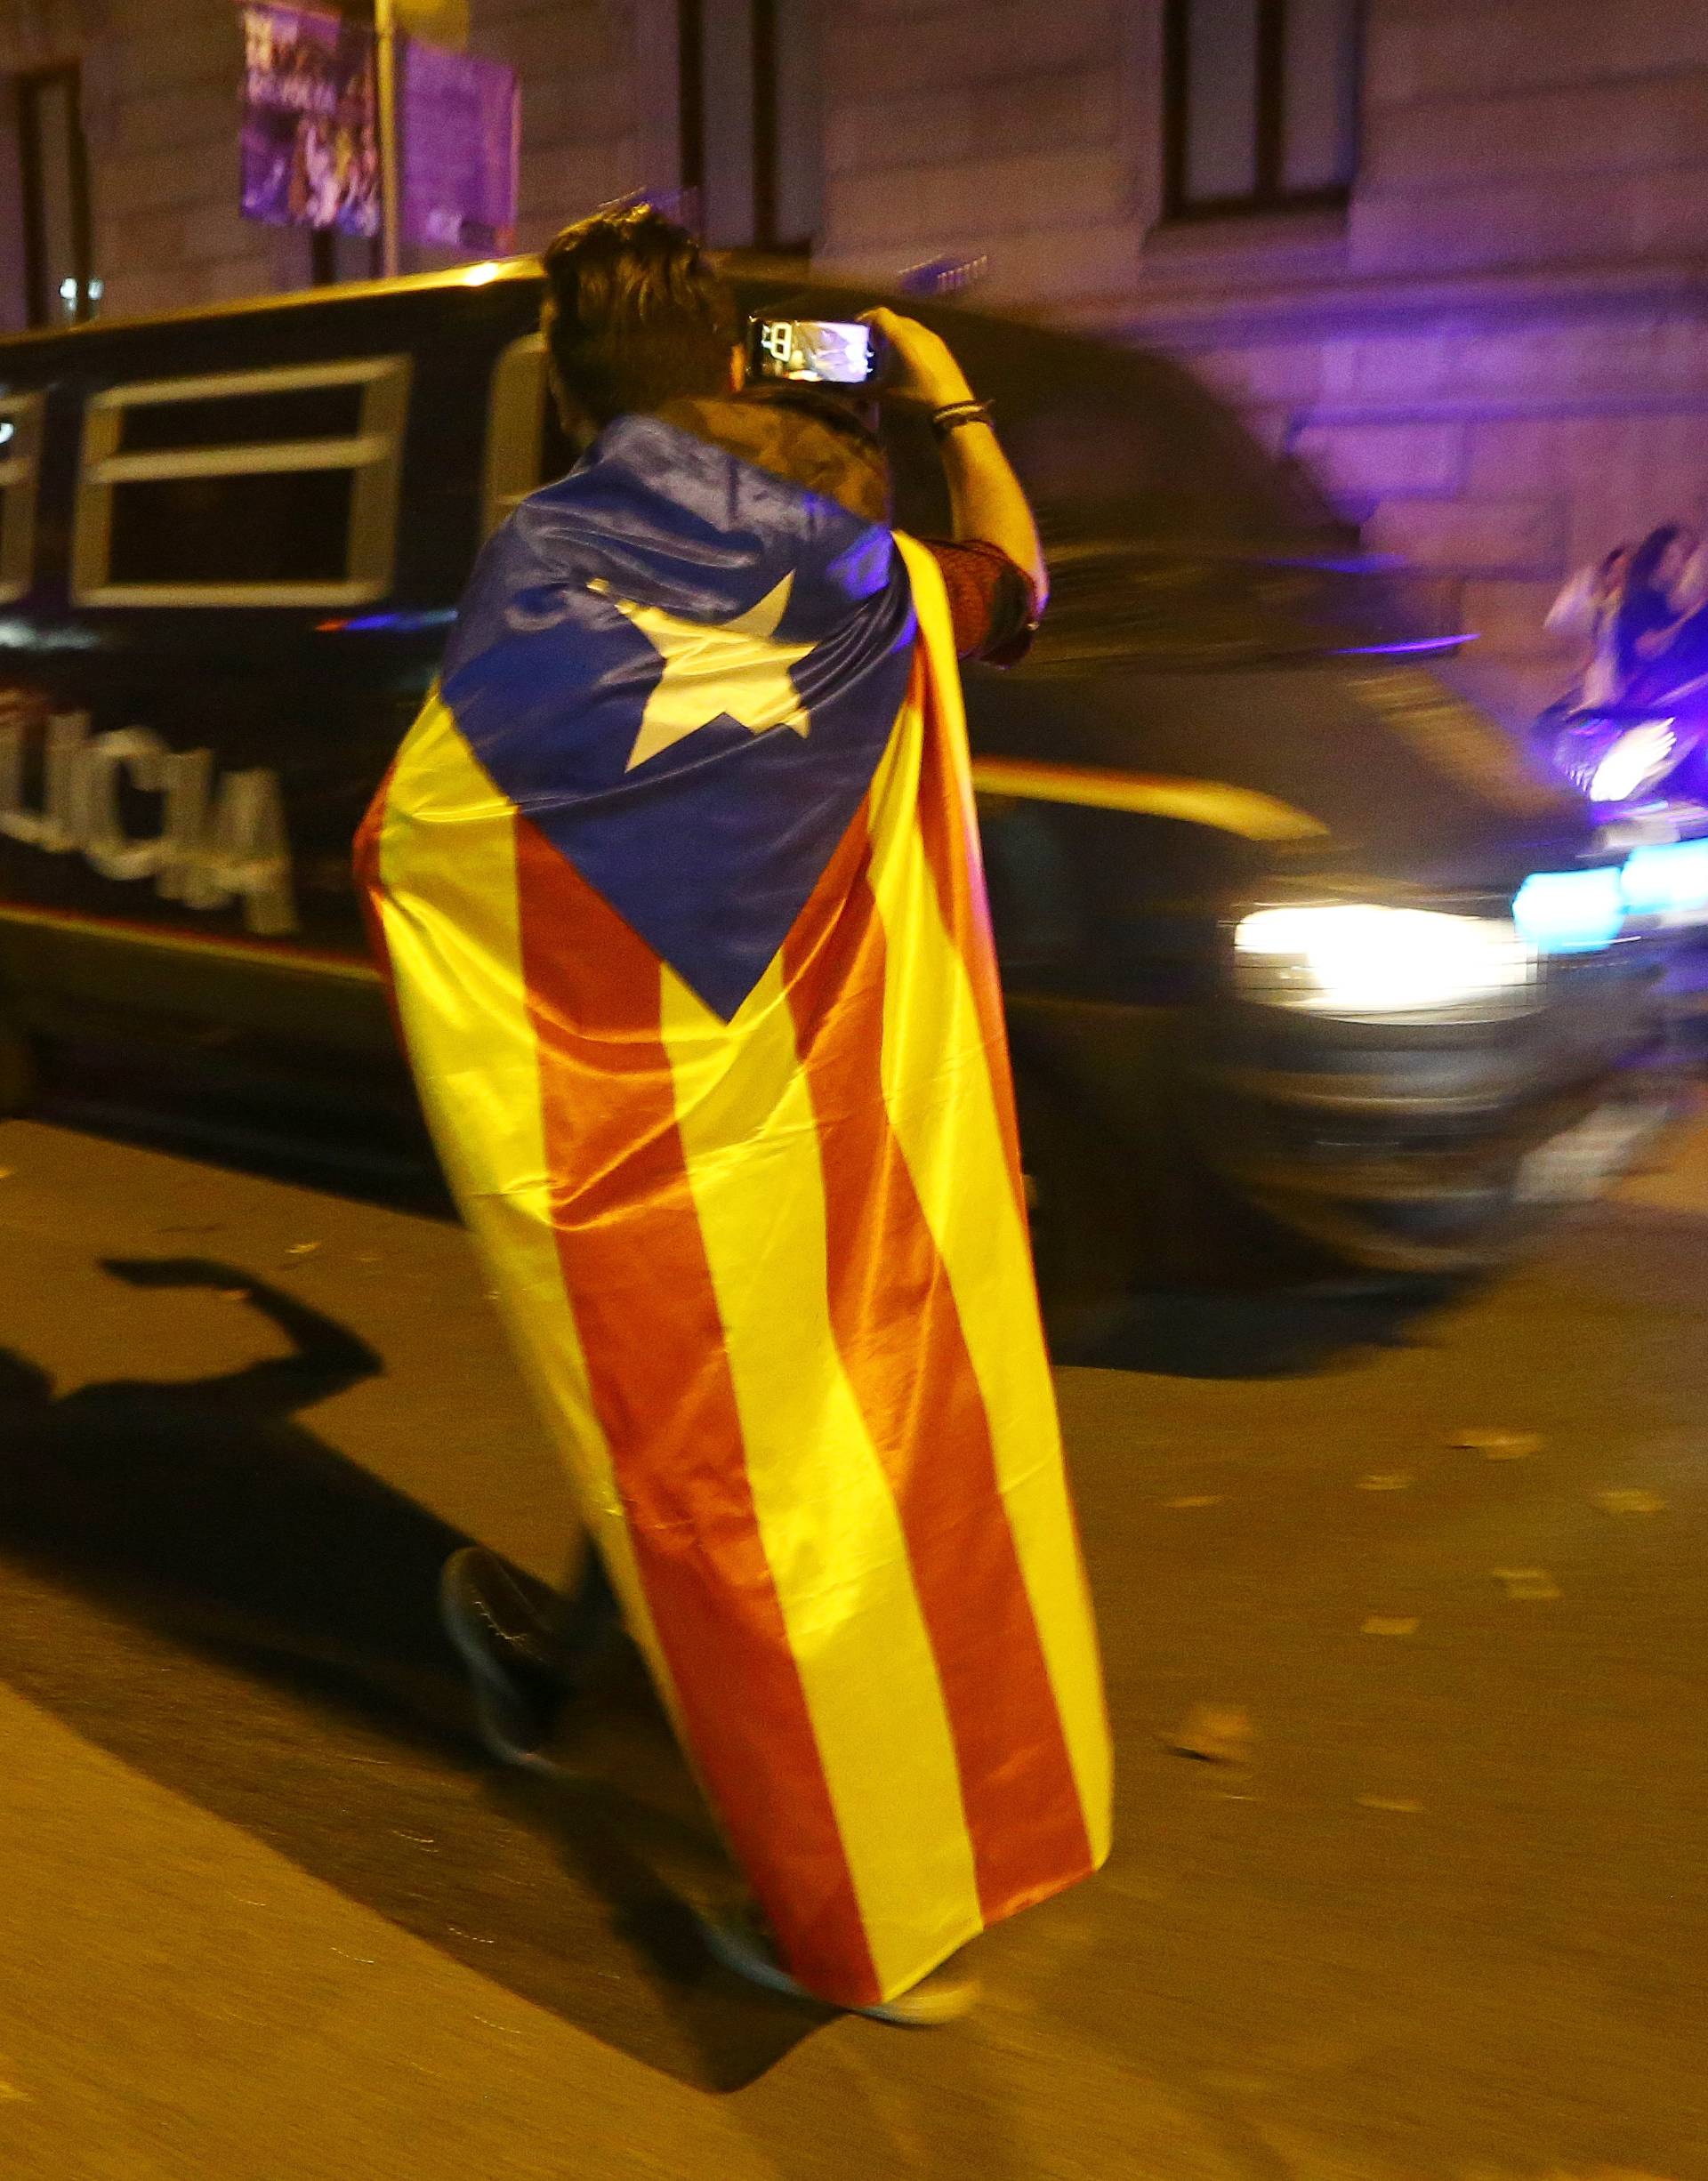 A man wearing a separatist Catalan flag films officers of the Spanish National Police outside the High Court of Justice of Catalonia in Barcelona